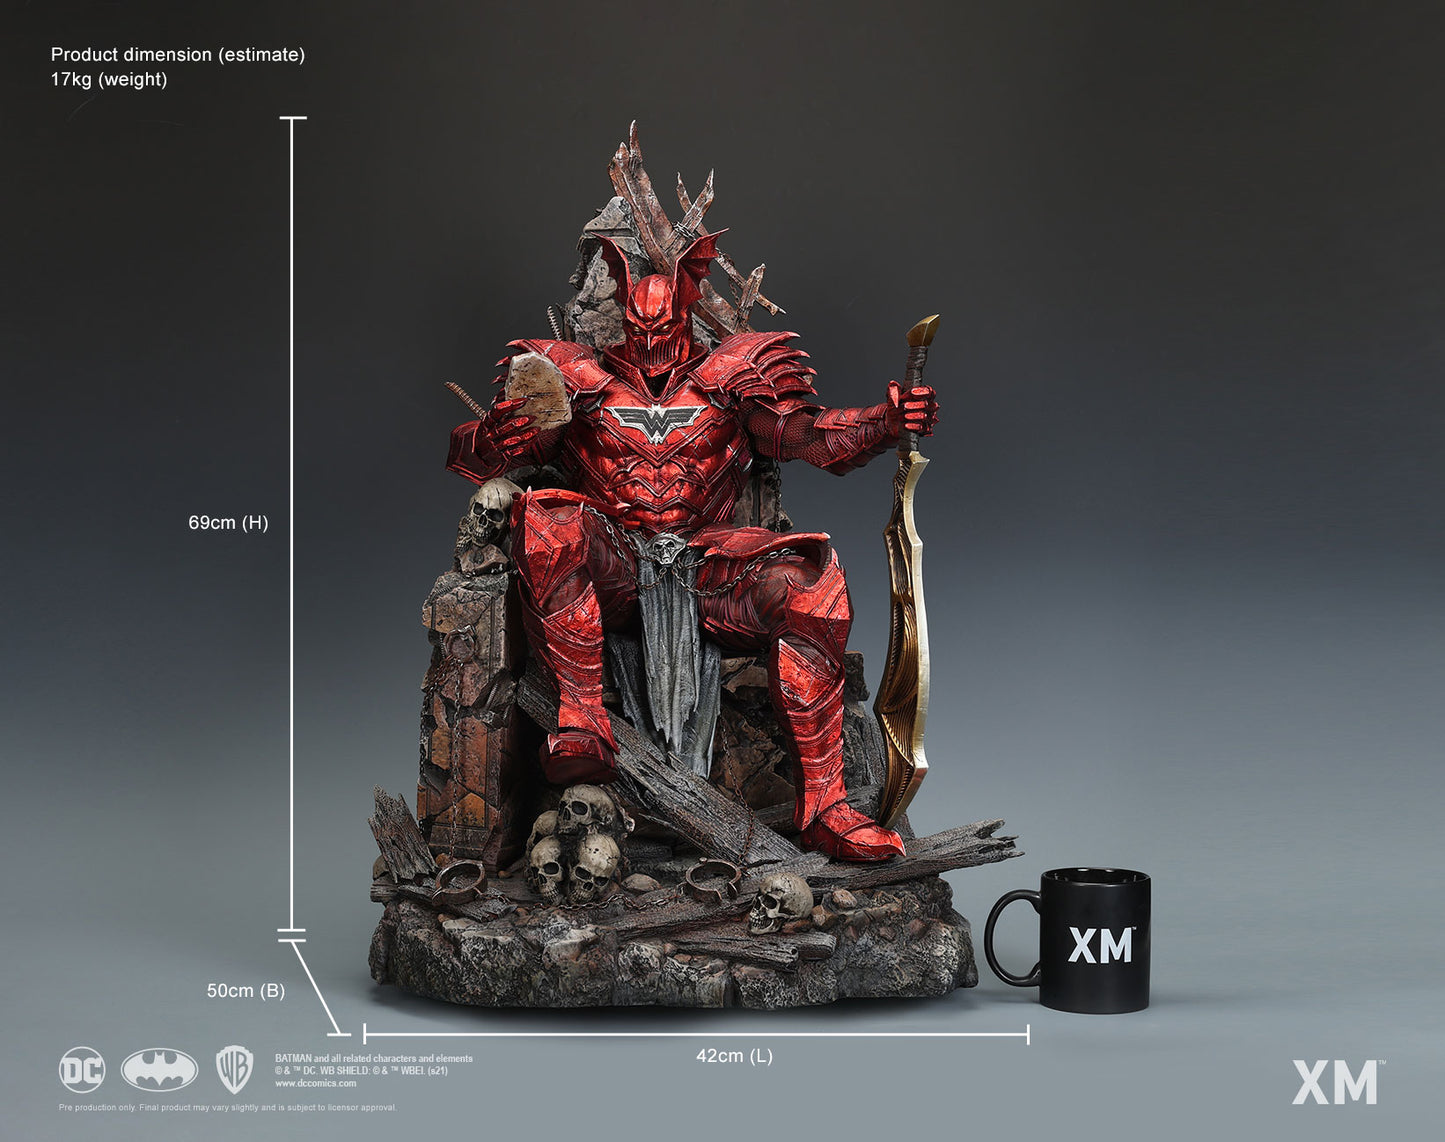 [PREORDER] XM DC - The Merciless - Ver B (XM EXCLUSIVE)